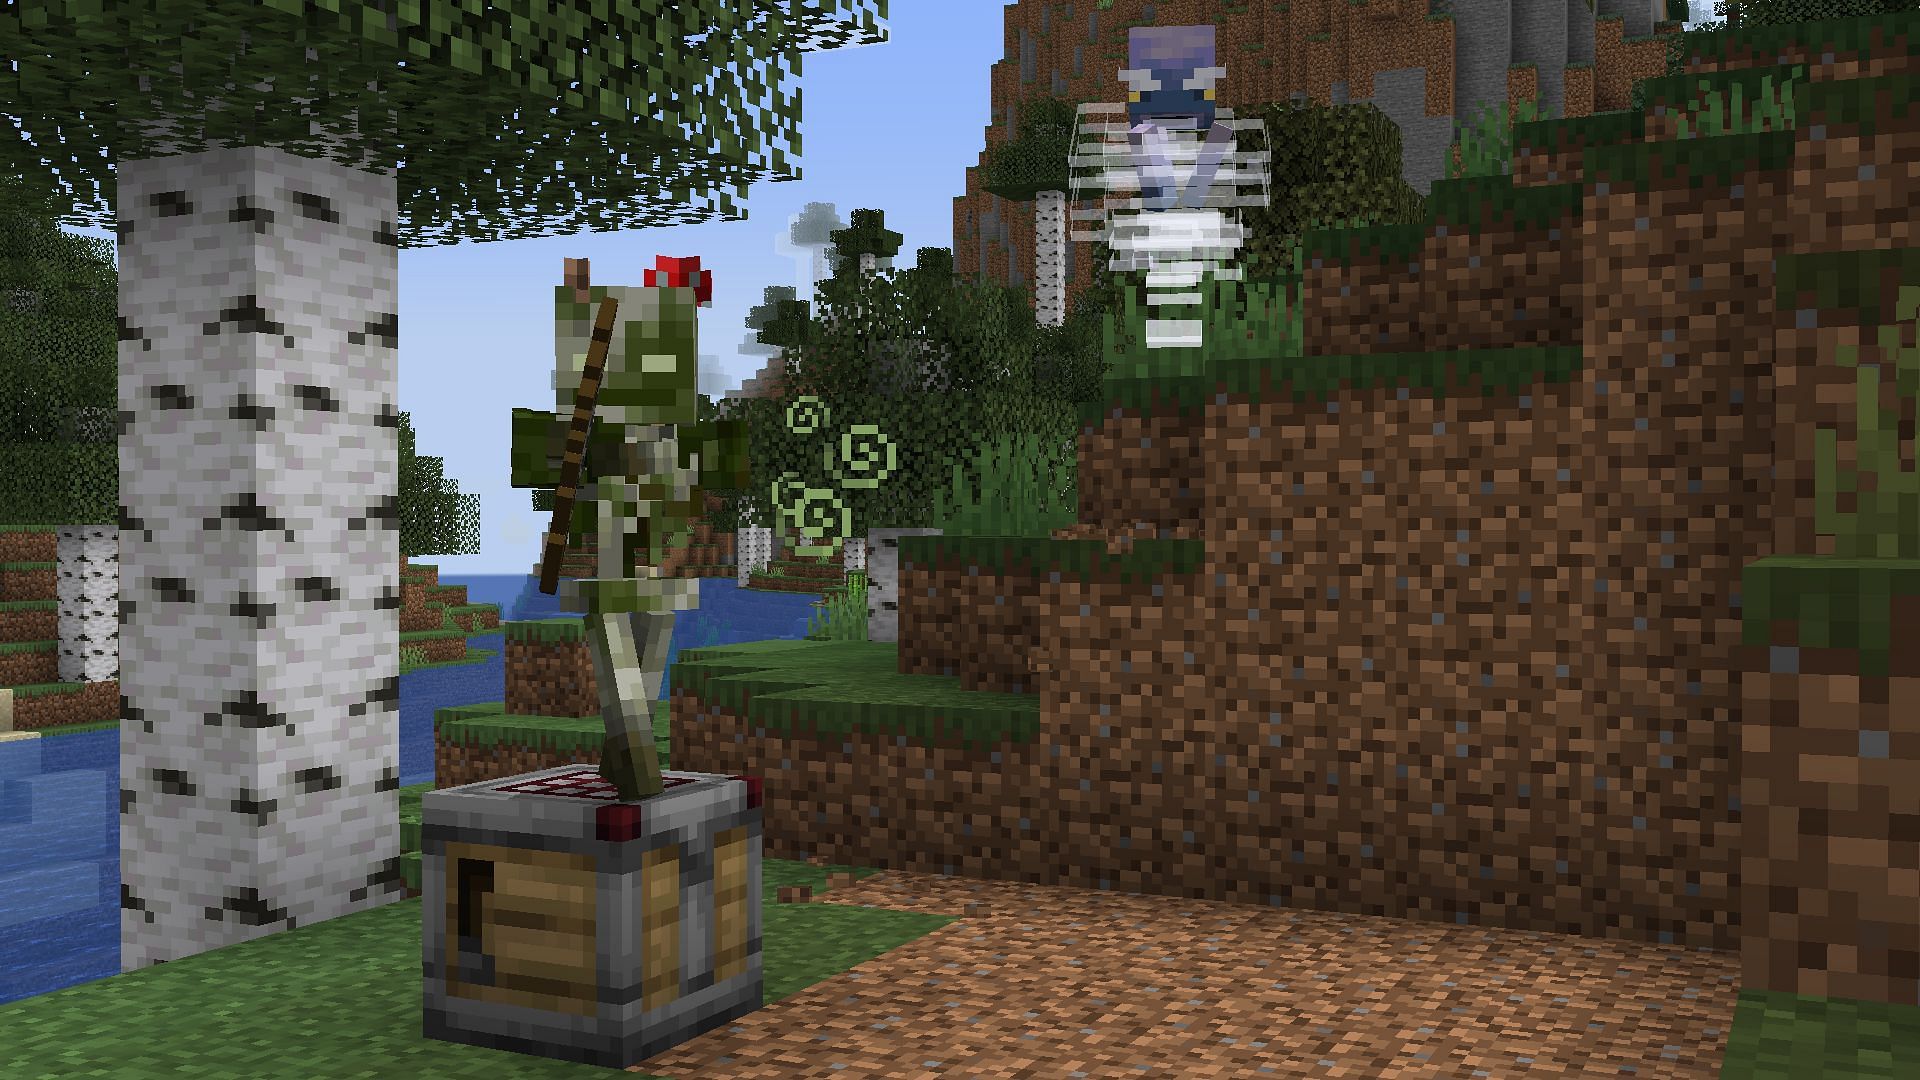 The breeze, the bogged, and the crafter all represent &quot;Tricky&quot; in their own ways. (Image via Mojang)